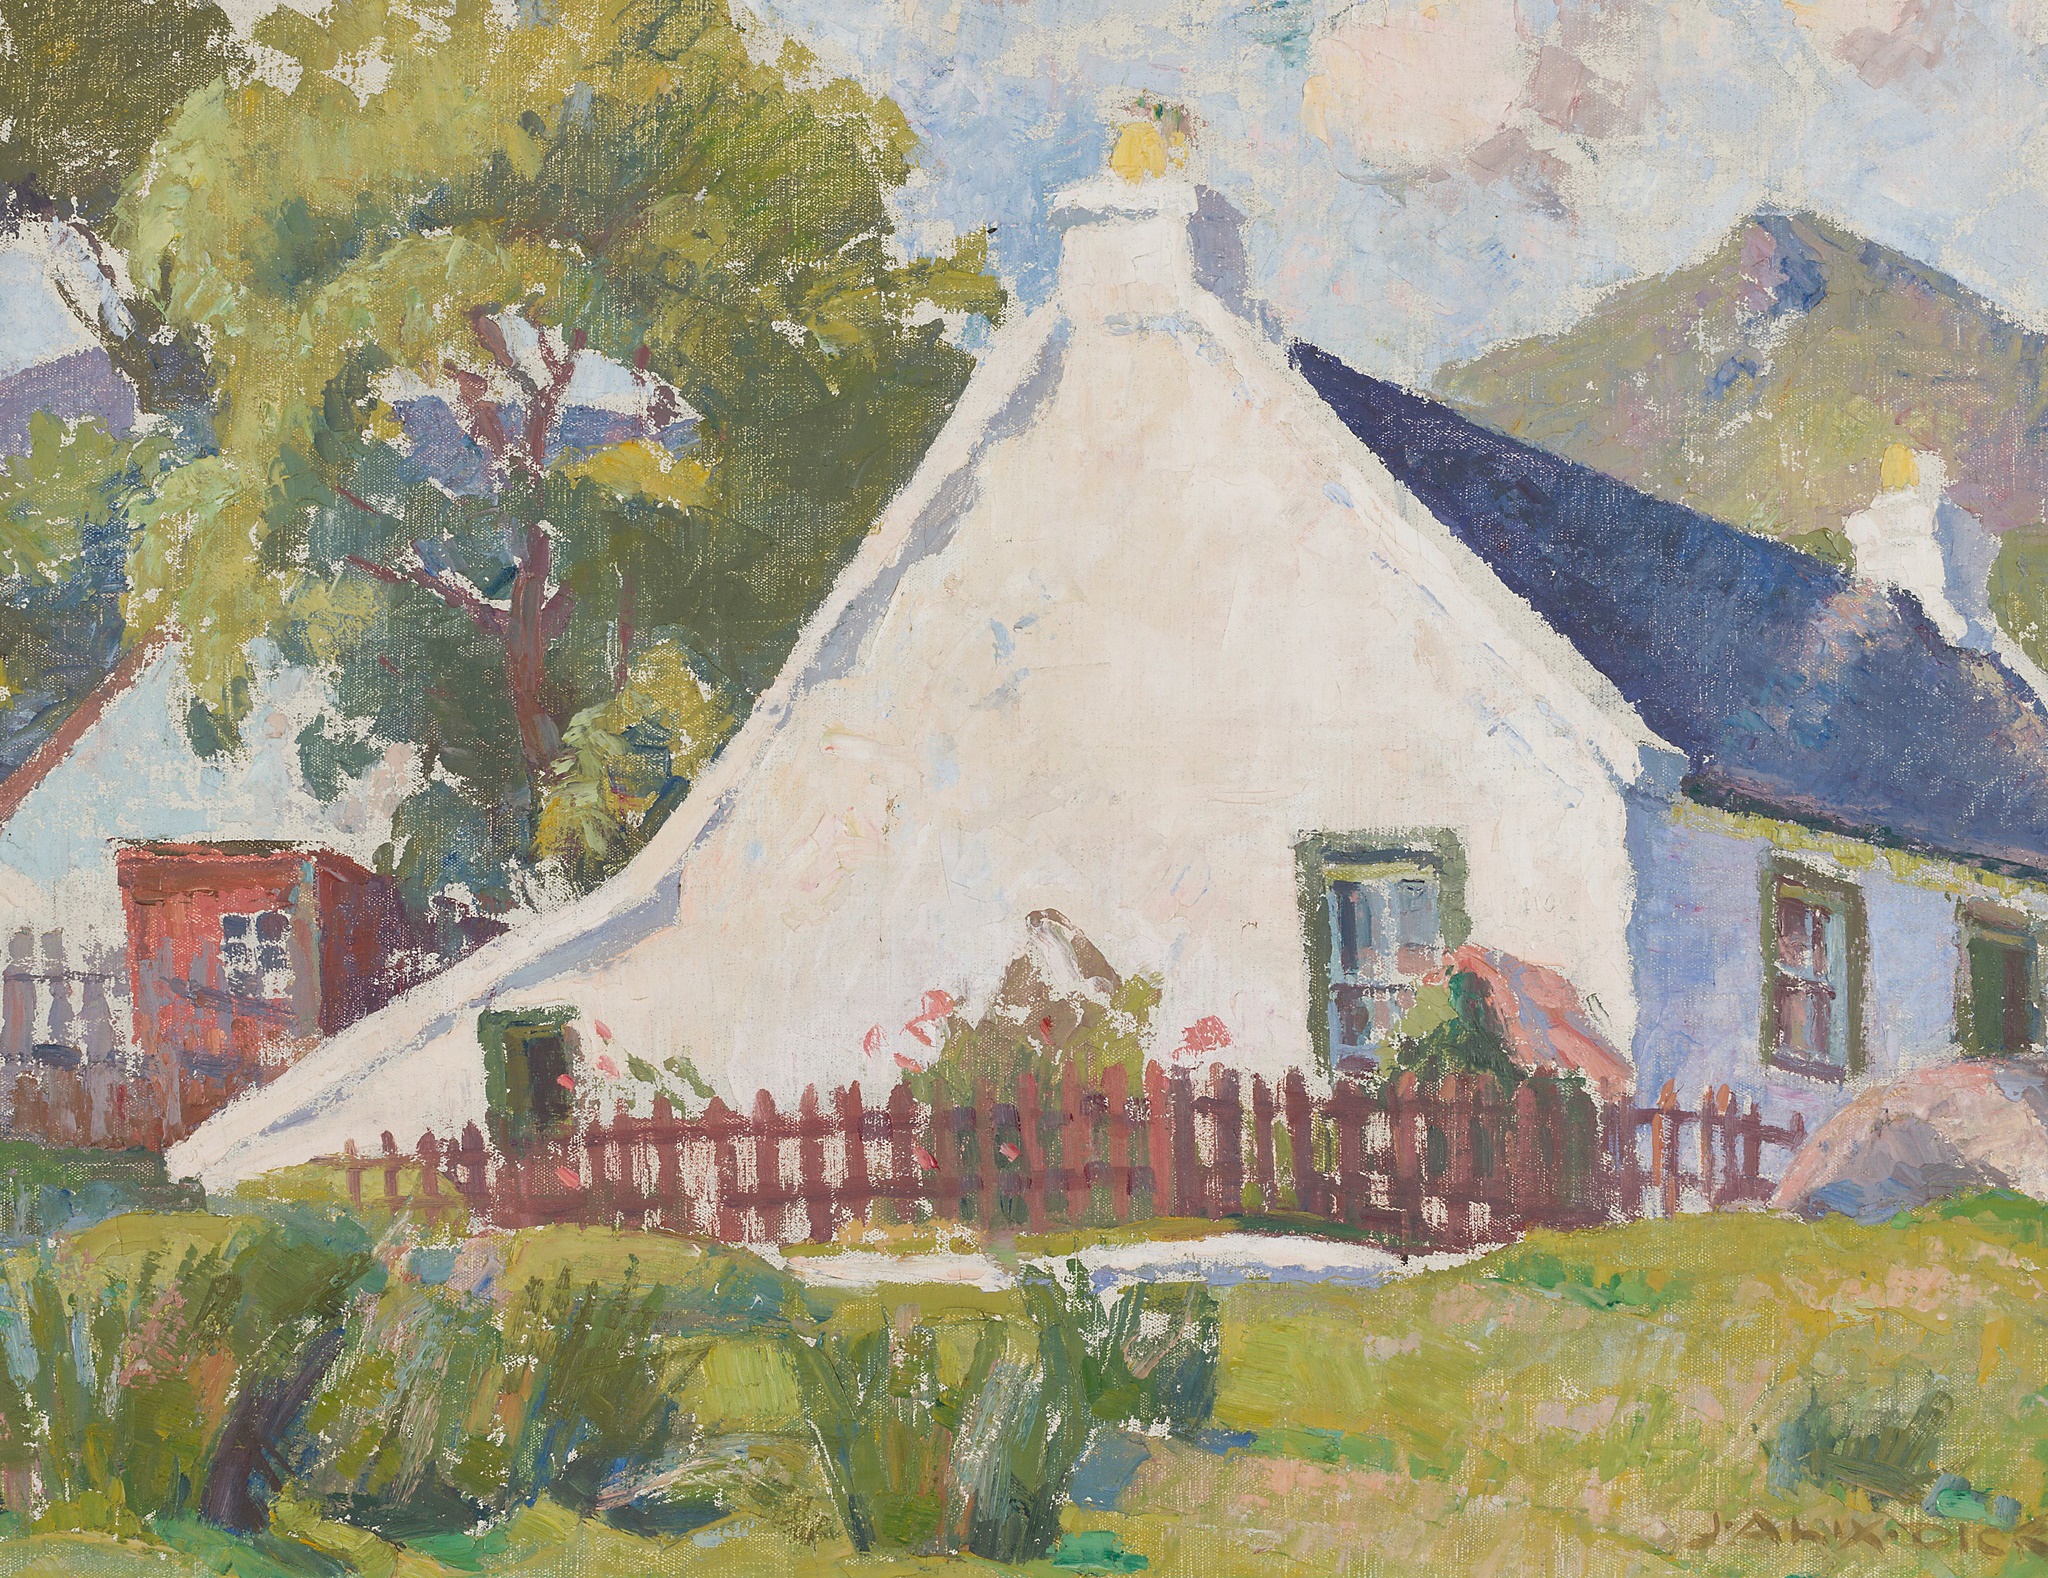 LOT 164 | § JESSIE ALEXANDRA DICK A.R.S.A. (SCOTTISH 1896-1976) | THE WHITE COTTAGE | £600 - £800 + fees